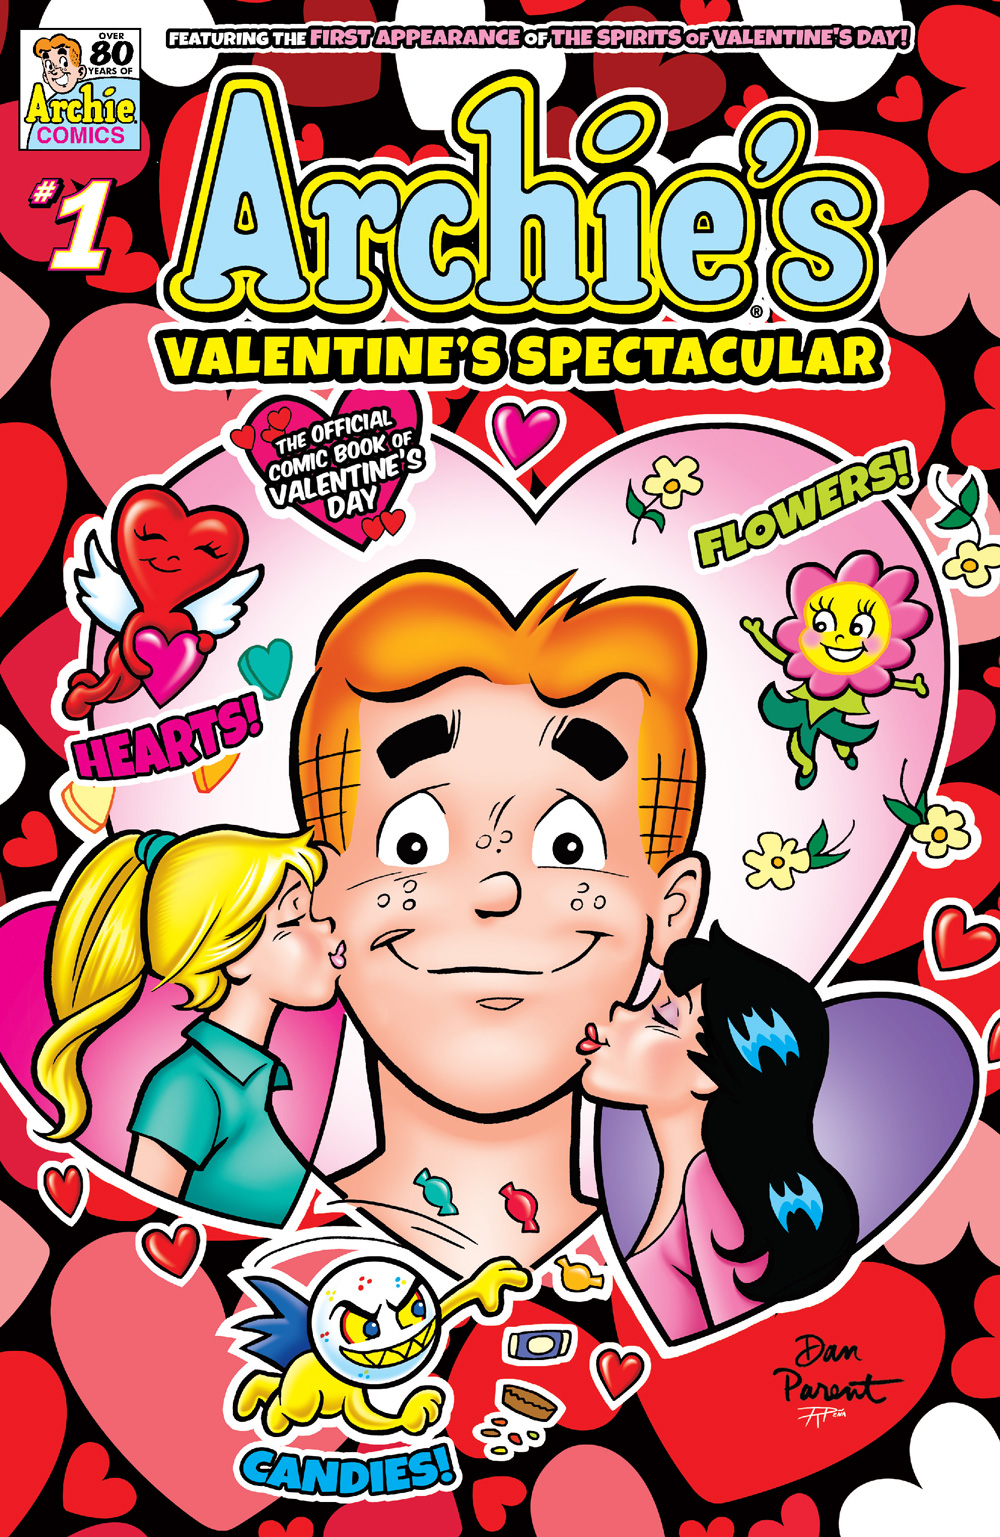 Archie gets kissed by Betty and Veronica on each cheek while the Spirits of Valentine's Day float around them. The spirits are Hearts, a heart with angel wings, Flowers, a smiling yellow Daisy in a dress, and Candies, a hard white candy with a mischeivous grin on his face.